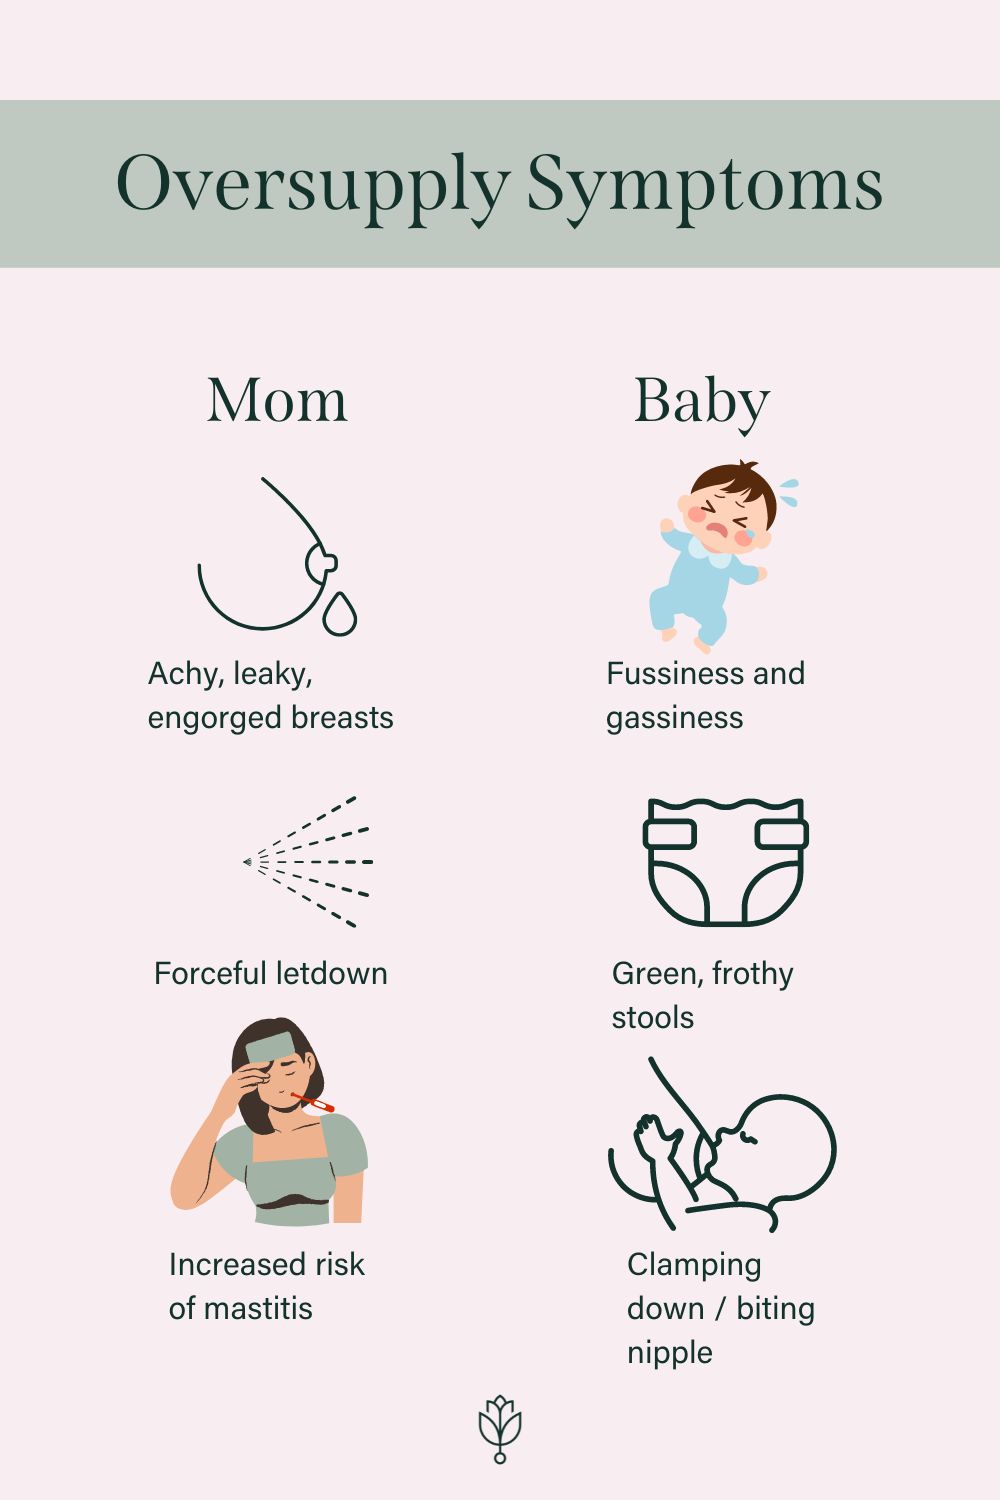 The image is an infographic titled "Oversupply Symptoms" and is divided into two columns, one labeled "Mom" and the other "Baby." It lists and illustrates symptoms associated with an oversupply of breast milk.For "Mom":There's an icon of a breast with a drop, labeled "Achy, leaky, engorged breasts."A spray of dotted lines indicating "Forceful letdown."An illustration of a woman holding her forehead in discomfort with the text "Increased risk of mastitis."For "Baby":An illustration of a crying baby with the text "Fussiness and gassiness."A diaper icon with the text "Green, frothy stools."An illustration of a baby clamping down on a nipple with the text "Clamping down / biting nipple."The colors are soft, with the background in pastel pink, and the infographic uses a mix of illustrations and icons to represent the symptoms. There's also a small icon of a wheat stalk at the bottom of the image, likely a decorative element.